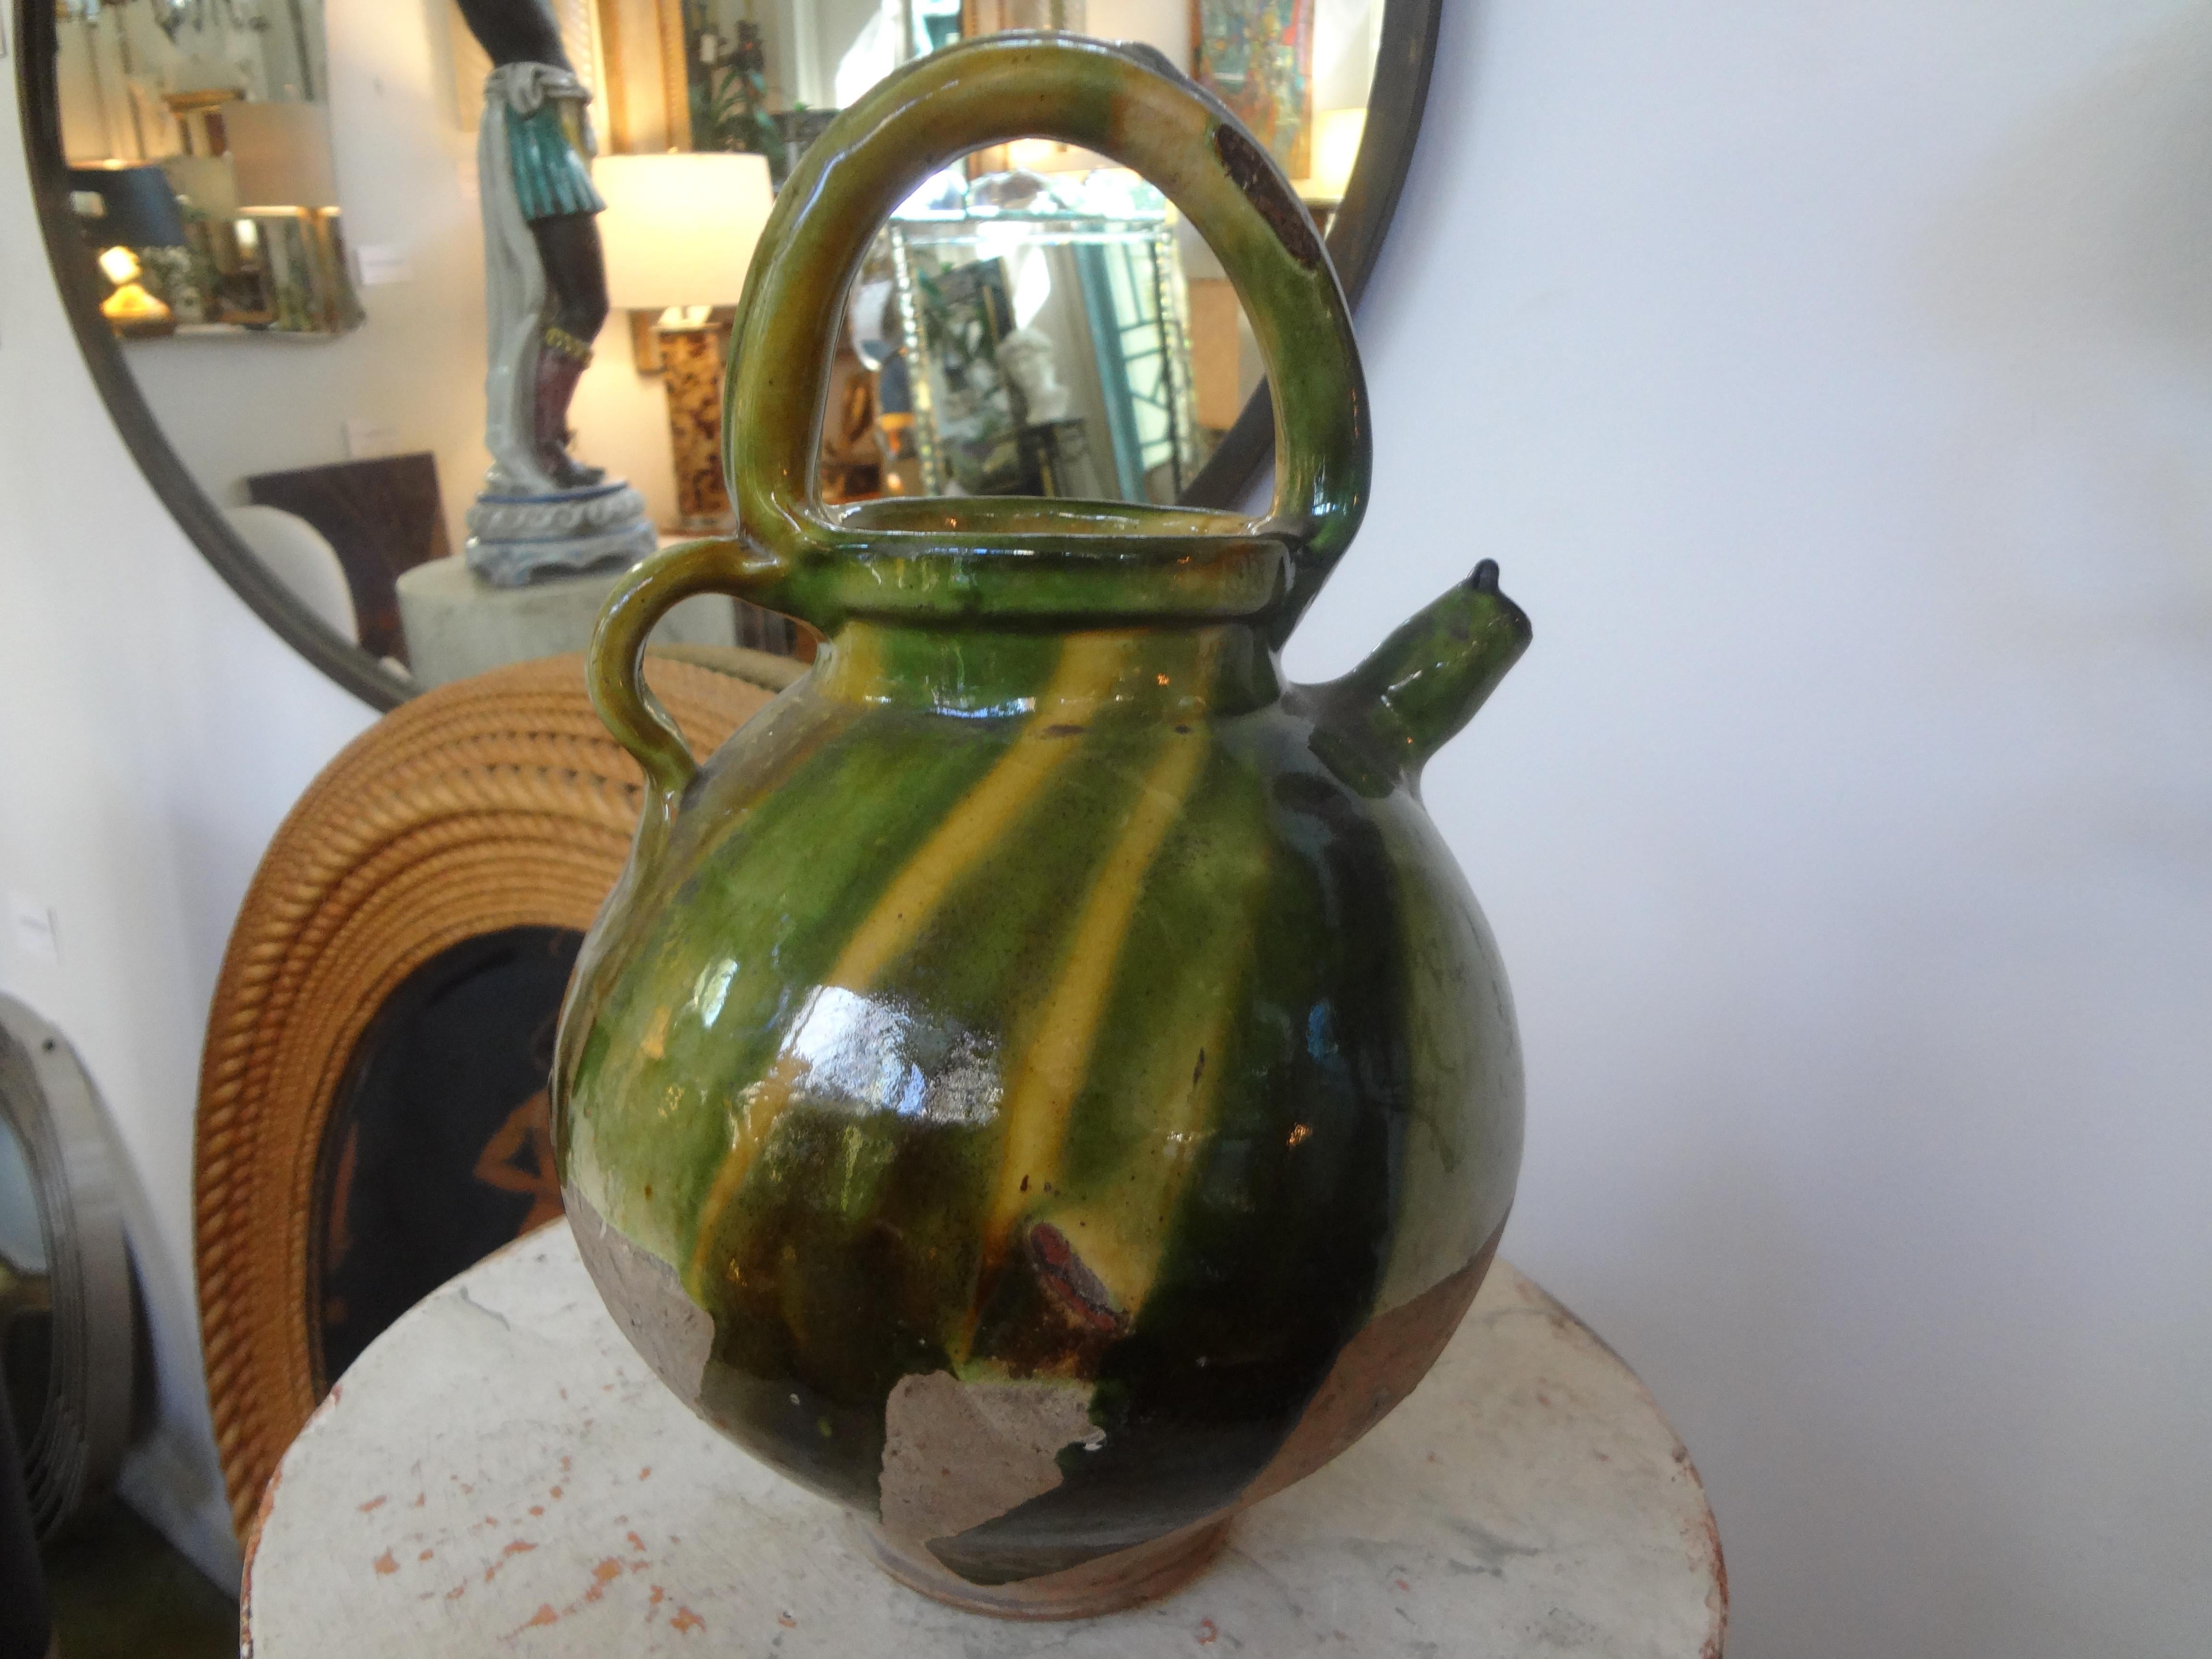 Earthenware 19th Century French Glazed Terracotta Vessel or Pitcher